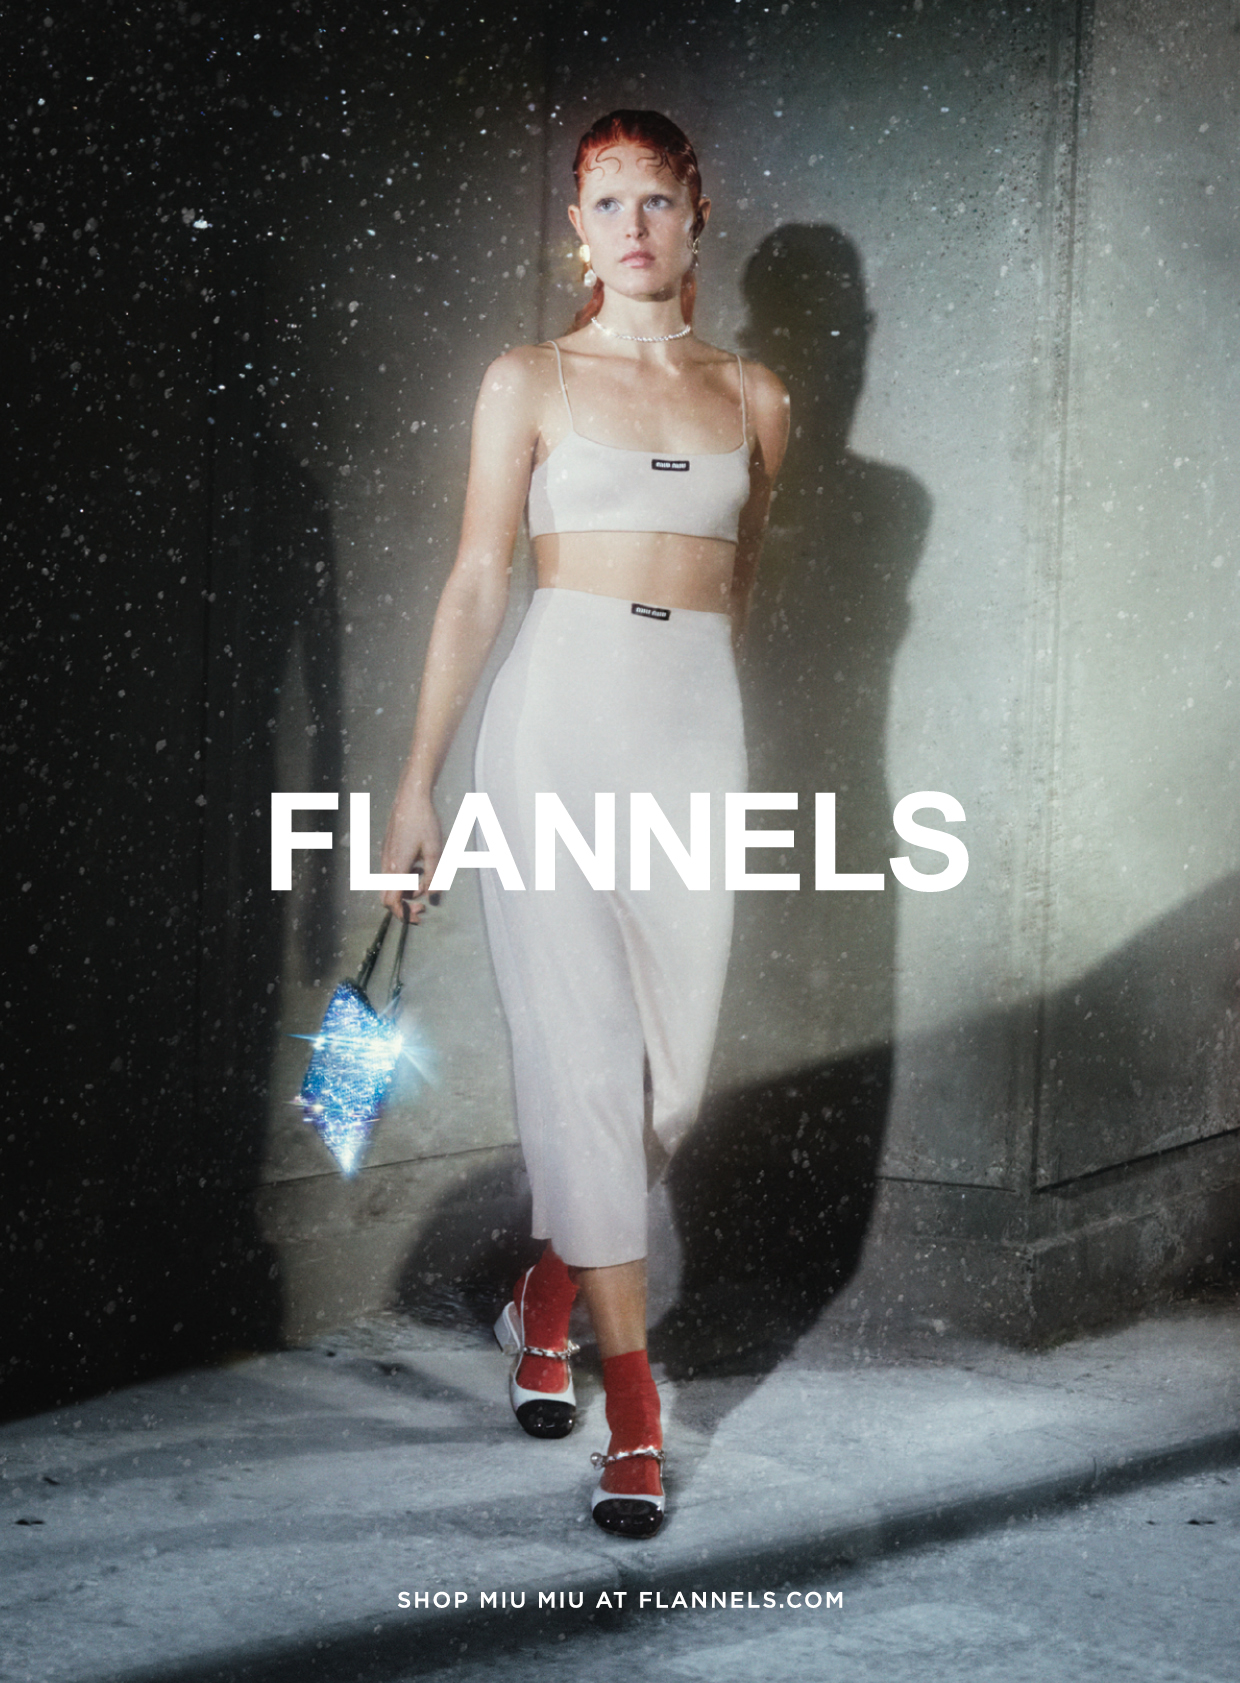 Model in cream top and trousers with red socks and white shoes against a grey concrete background with Flannels logo across the page.